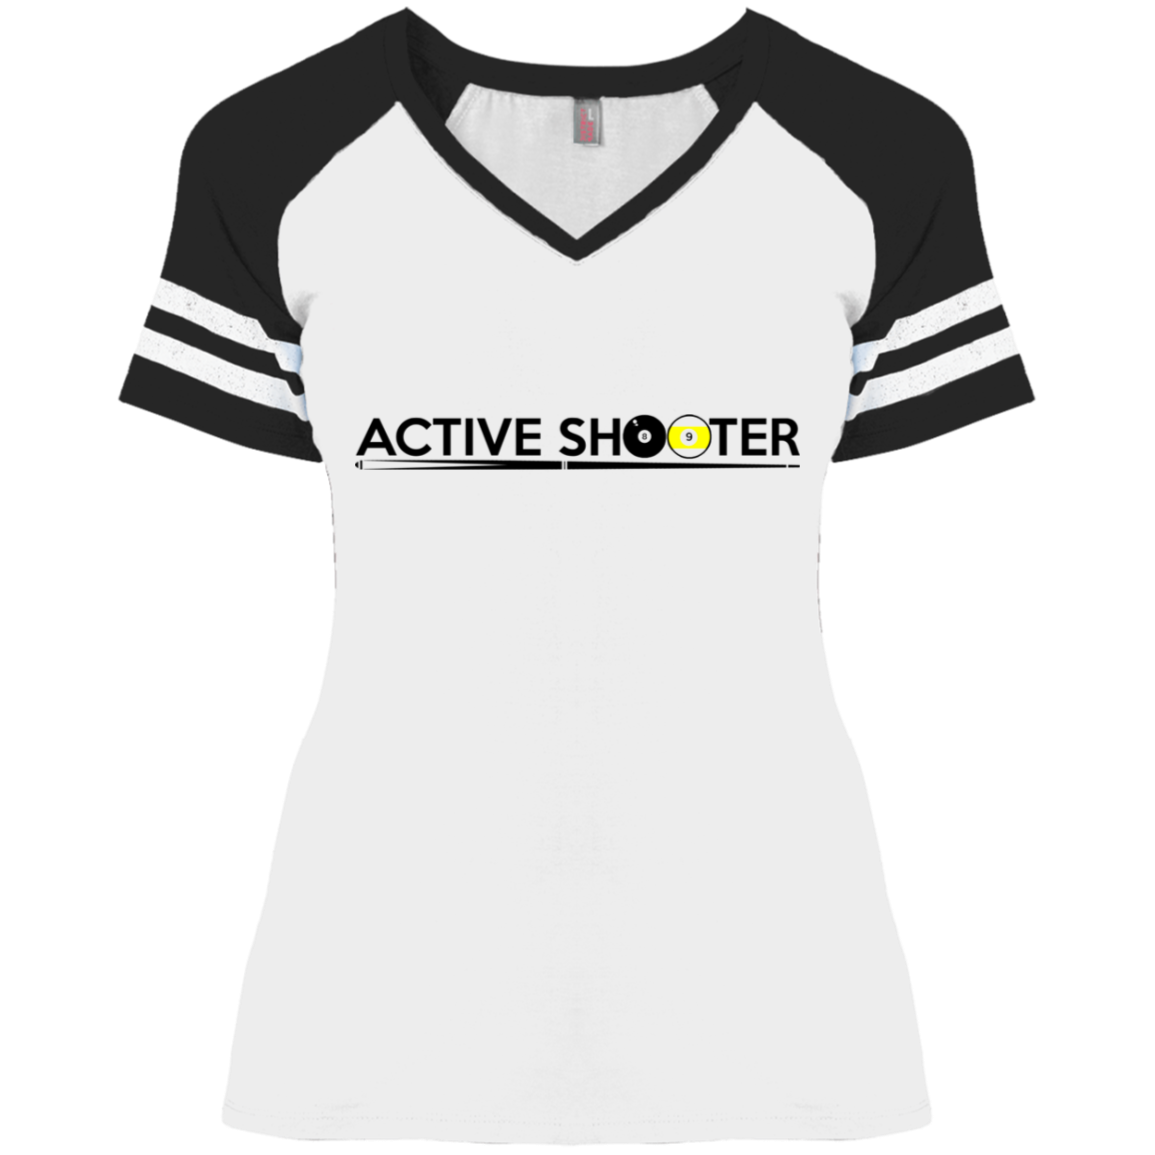 The GHOATS Custom Design #1. Active Shooter. Ladies' Game V-Neck T-Shirt